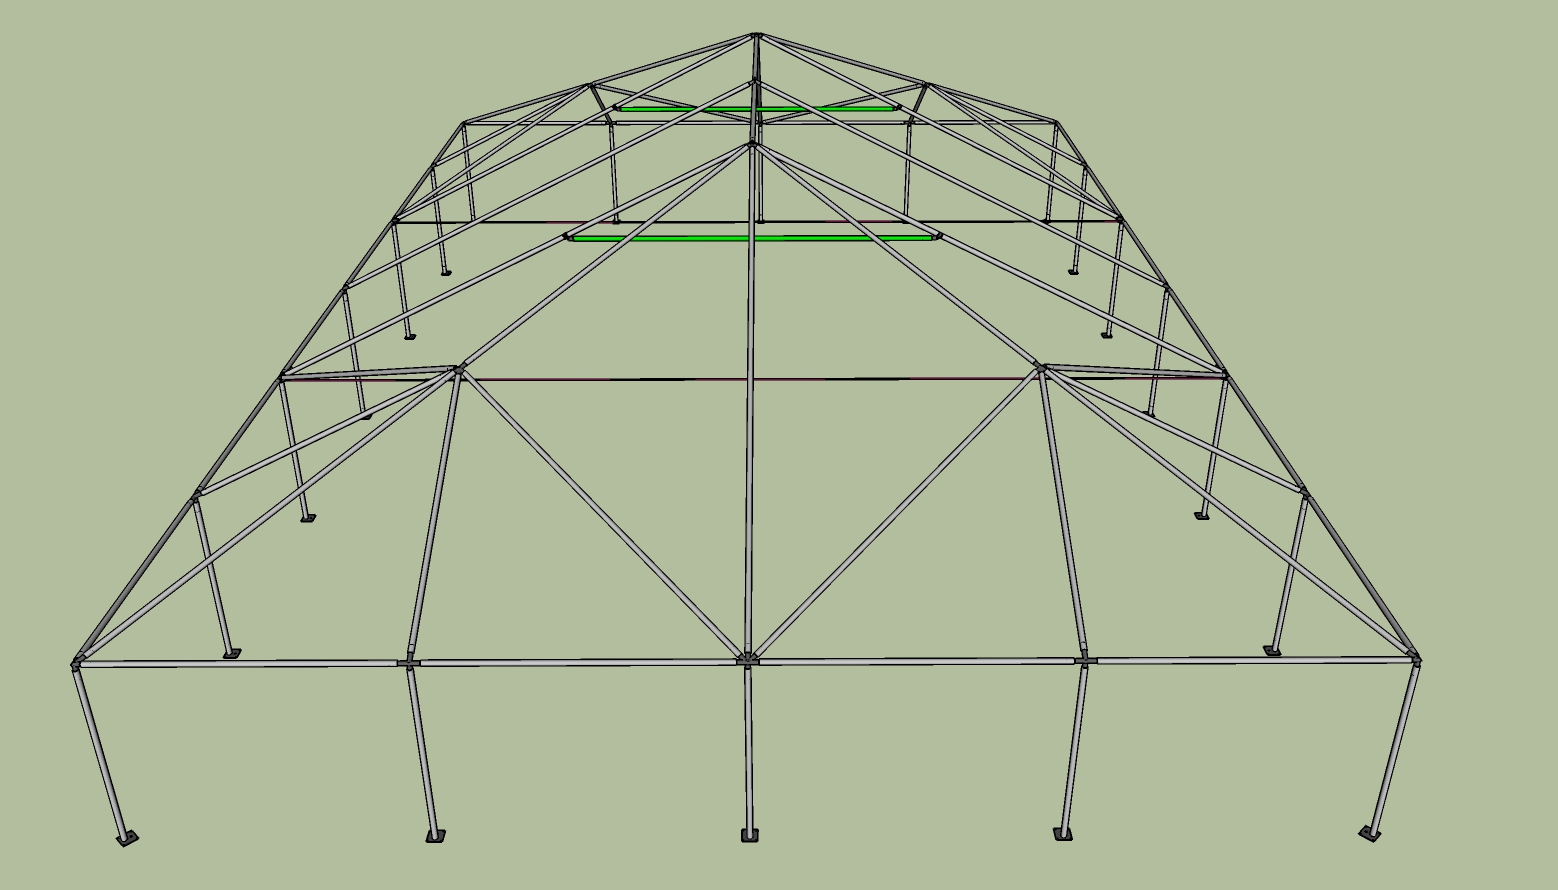 40x60 frame tent side view